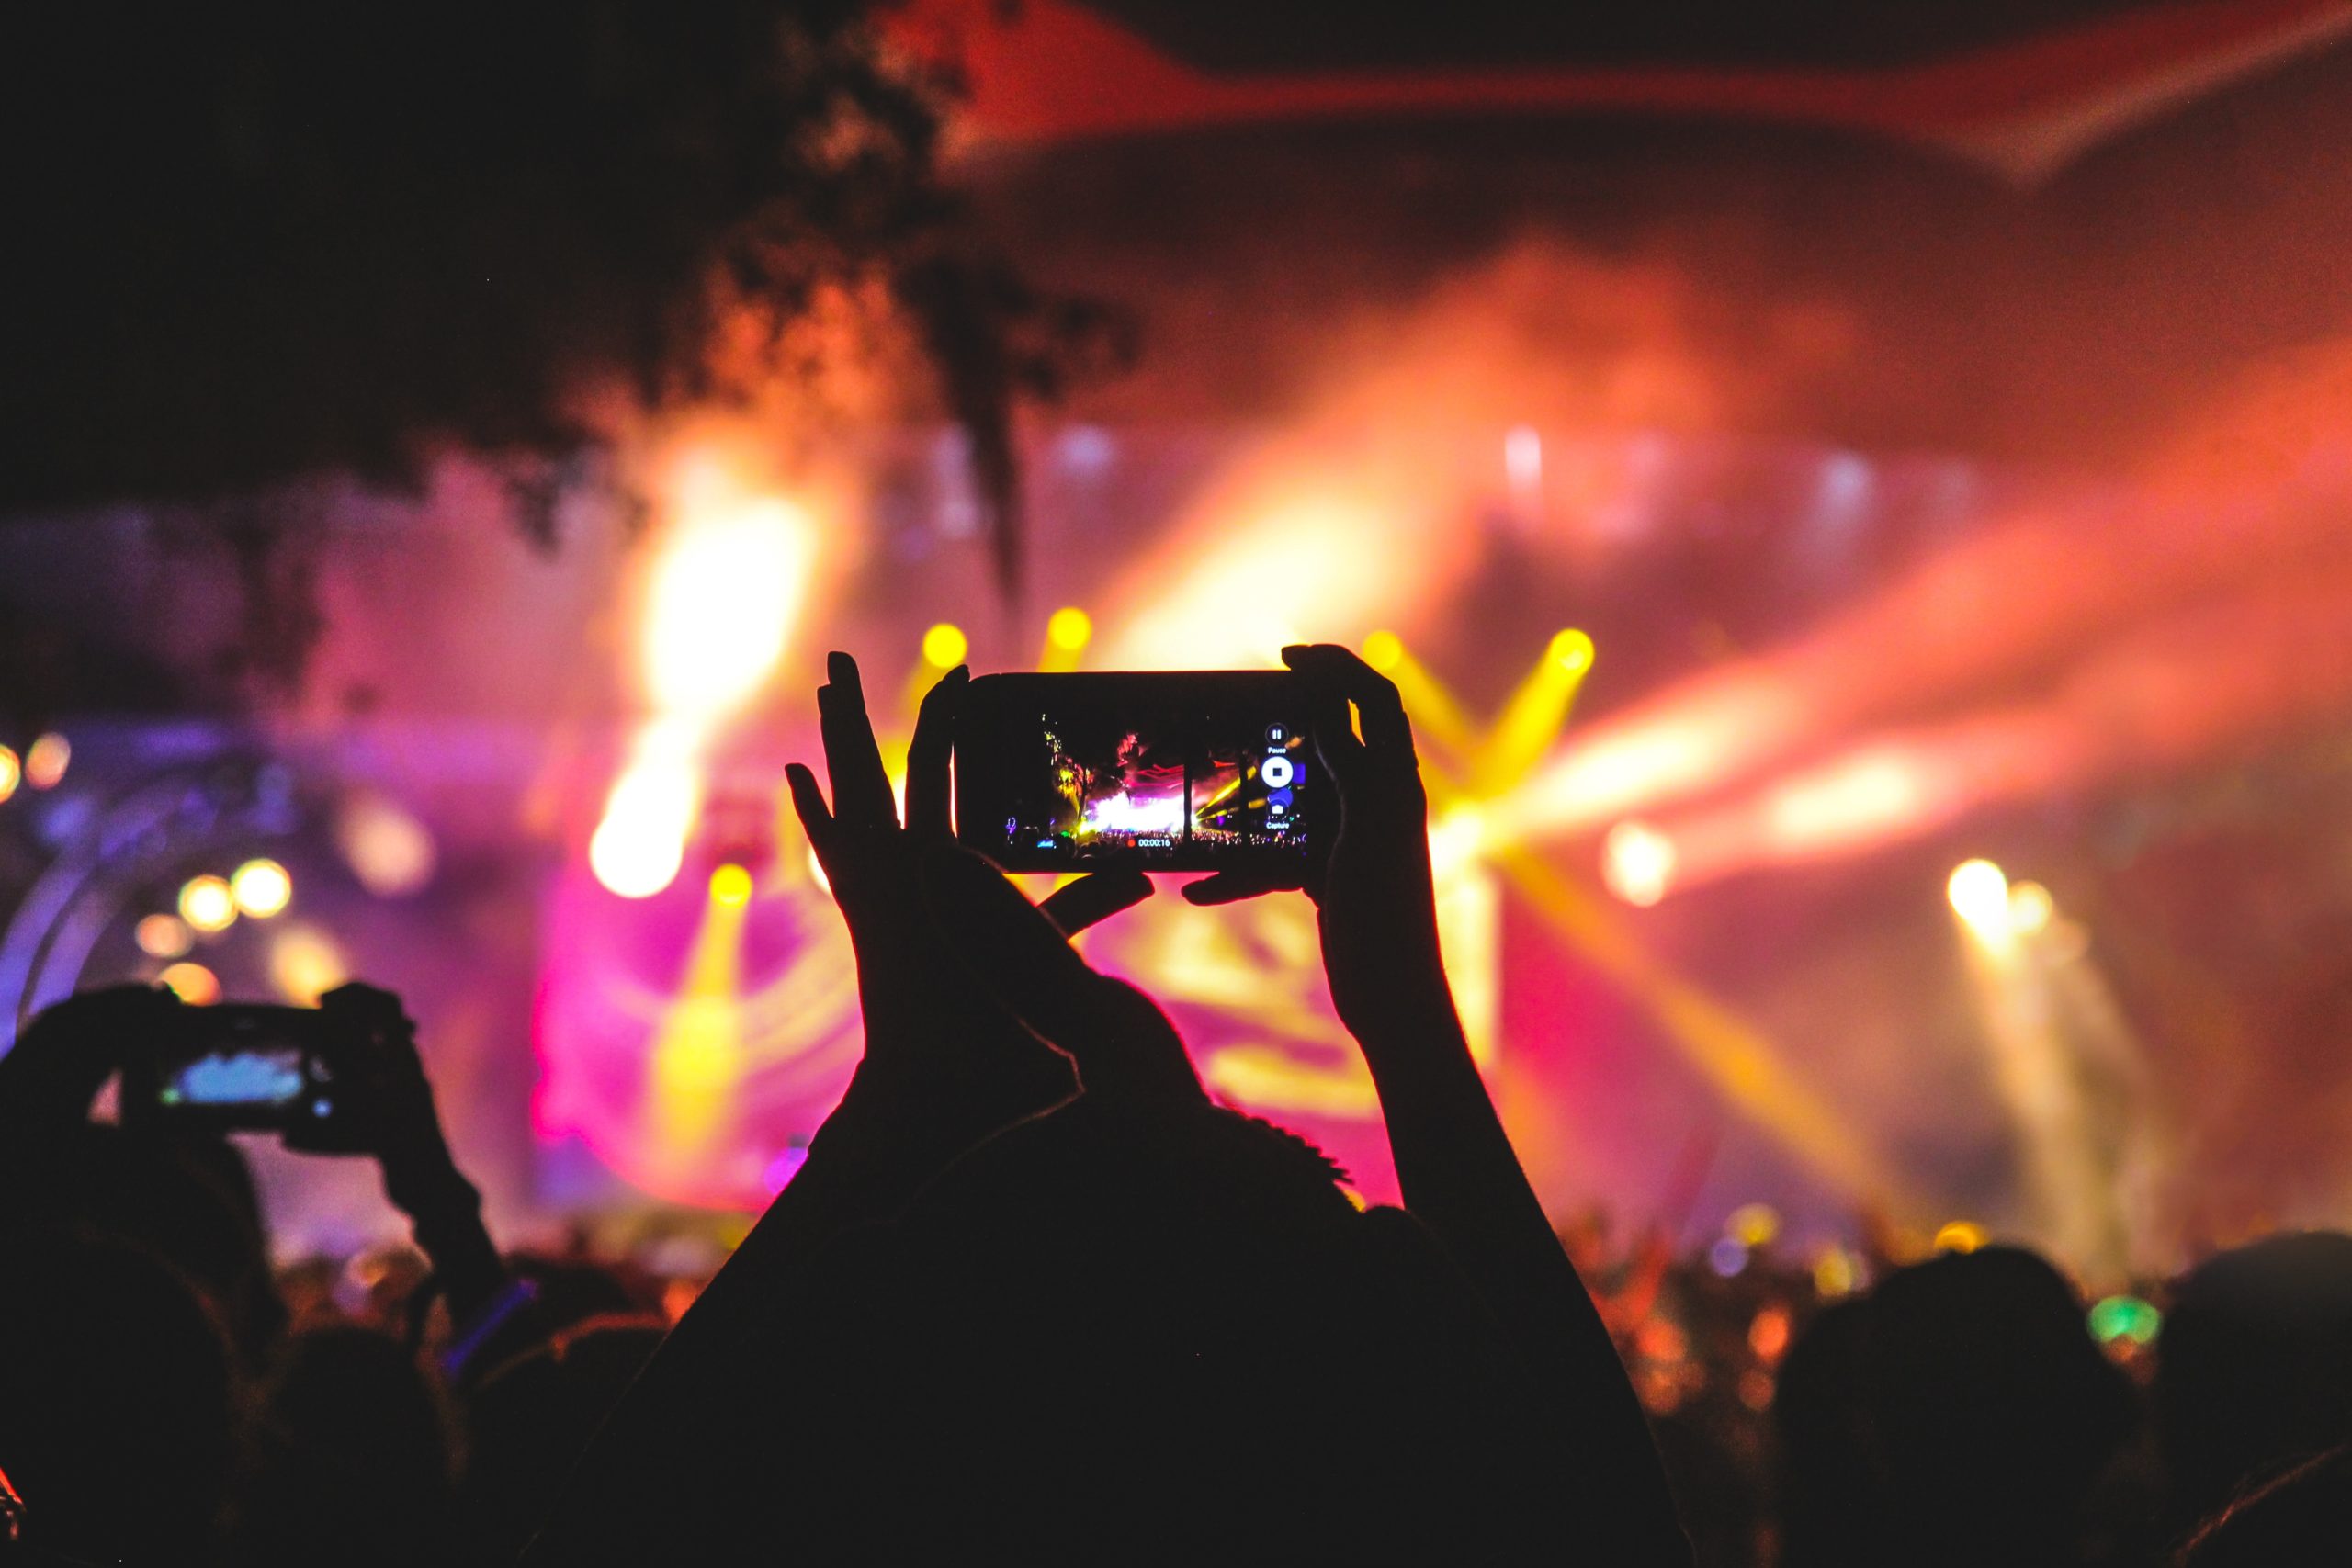 A person takes a video at a concert